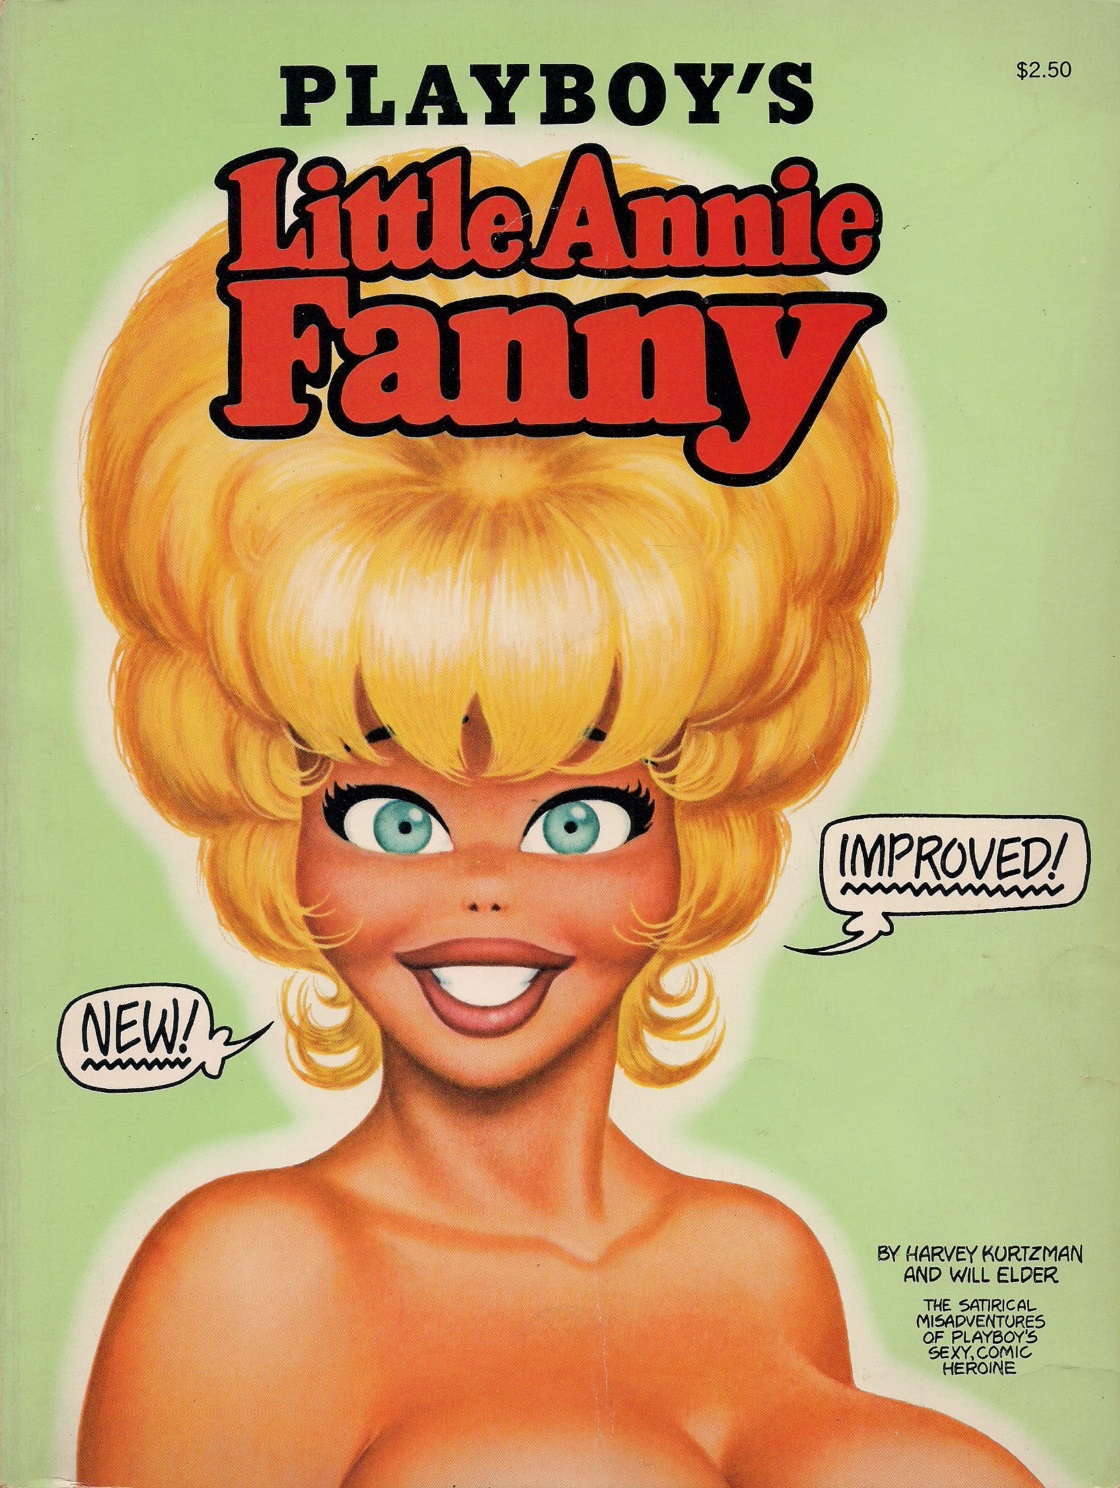 TALES FROM THE KRYPTONIAN: Sexpot Saturday with Little Annie Fanny. 